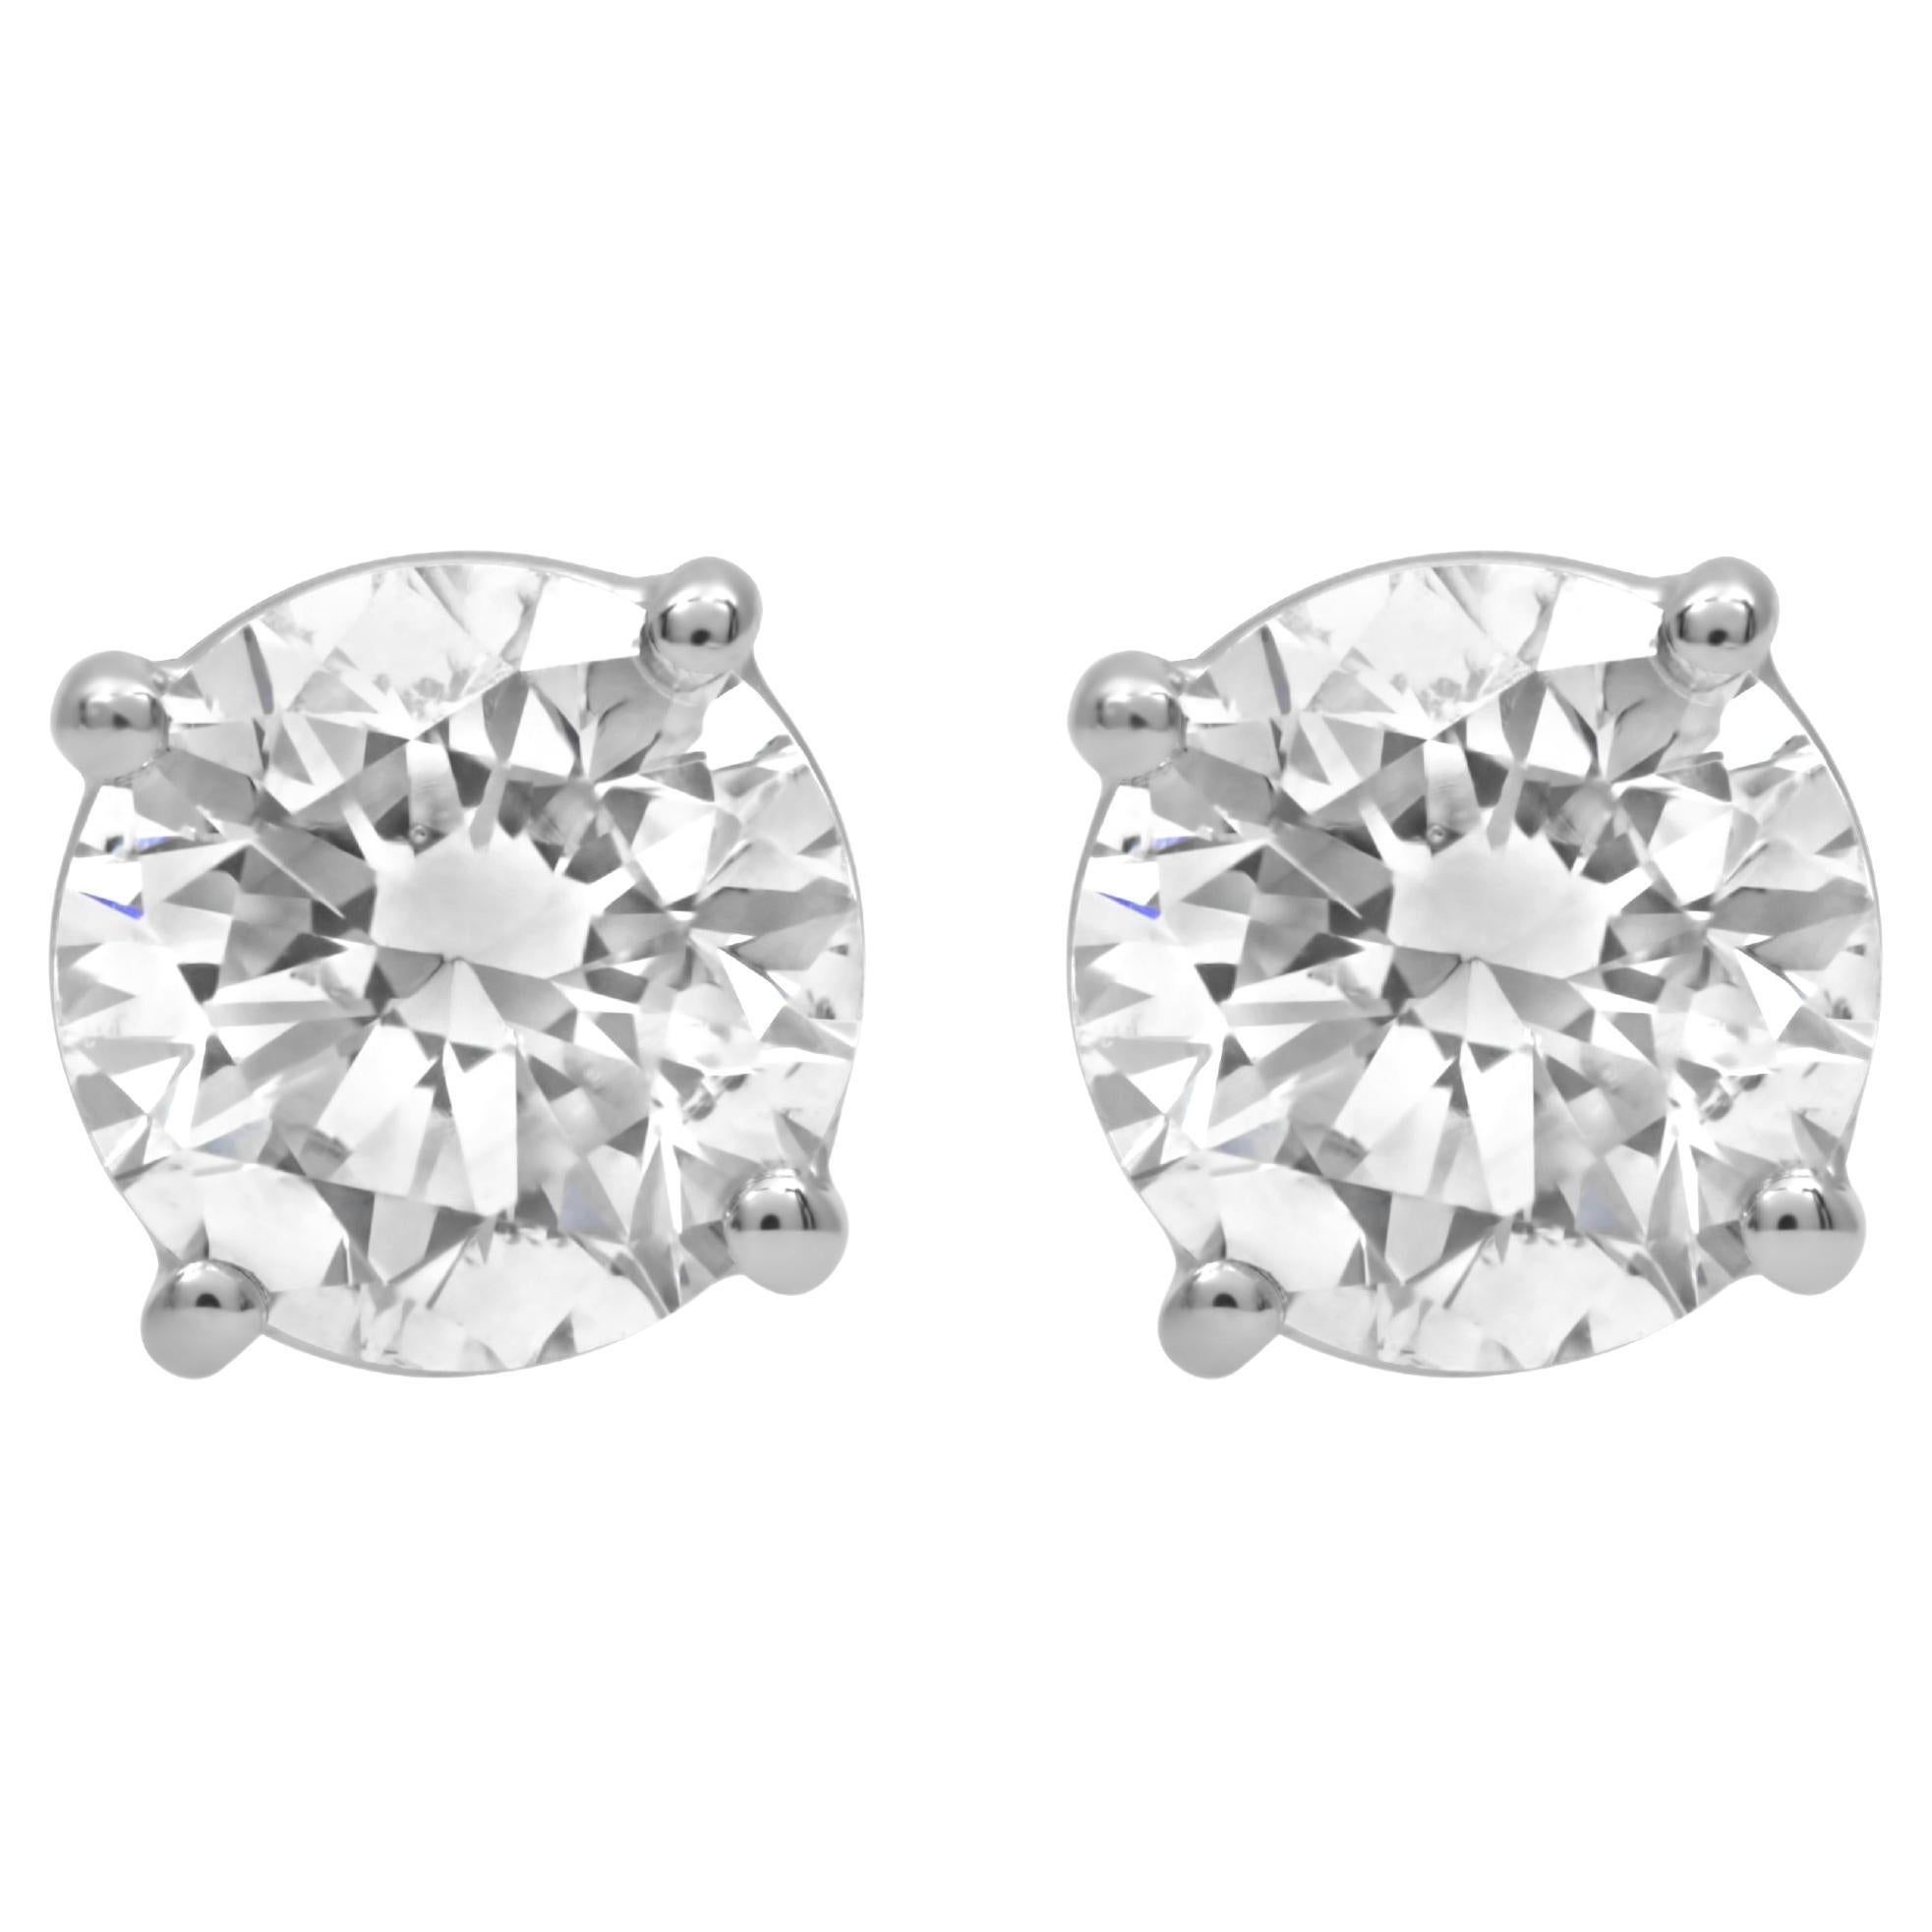 14kt white gold 4 prong stud earrings featuring 4.55 cts of round diamonds (HI SI) screw backs